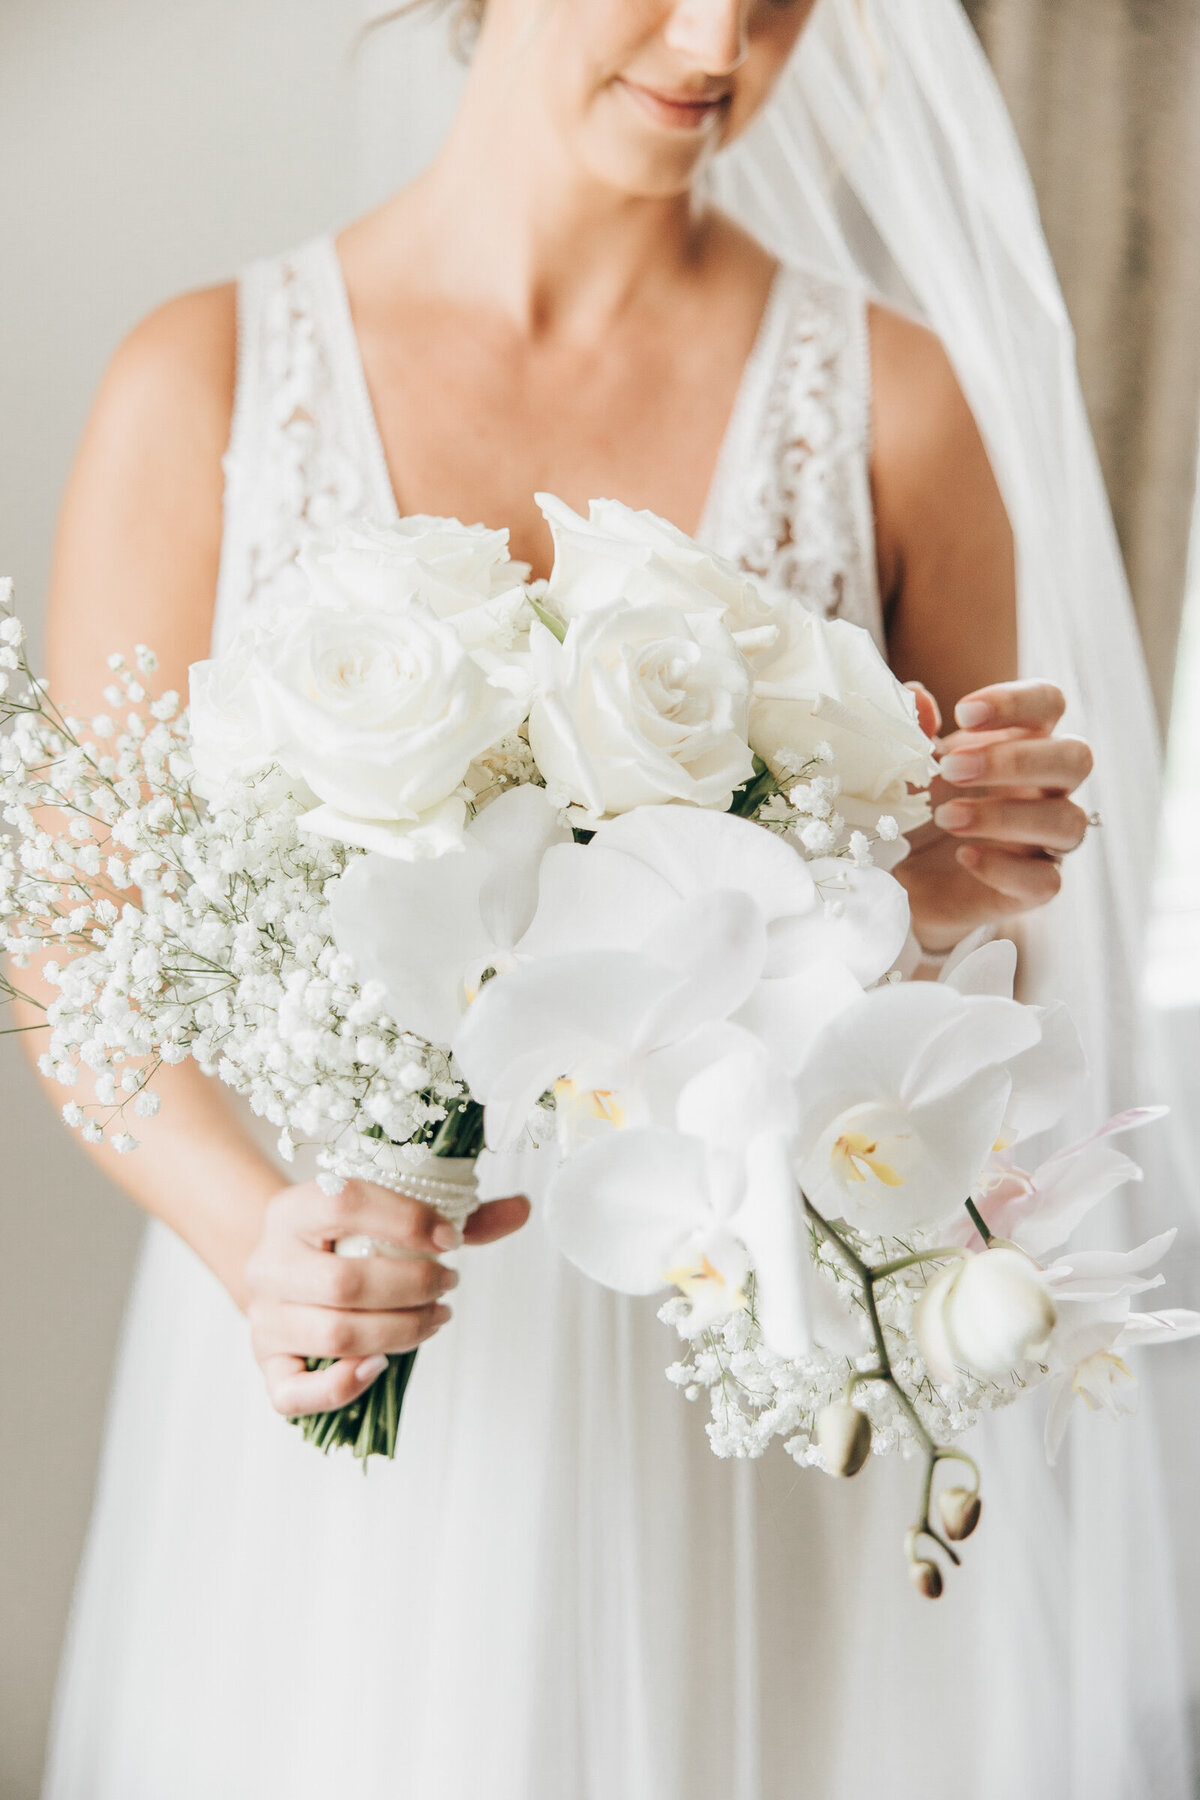 Gorgeous, cascading, white wedding bouquet with white orchids, baby's breath and white roses